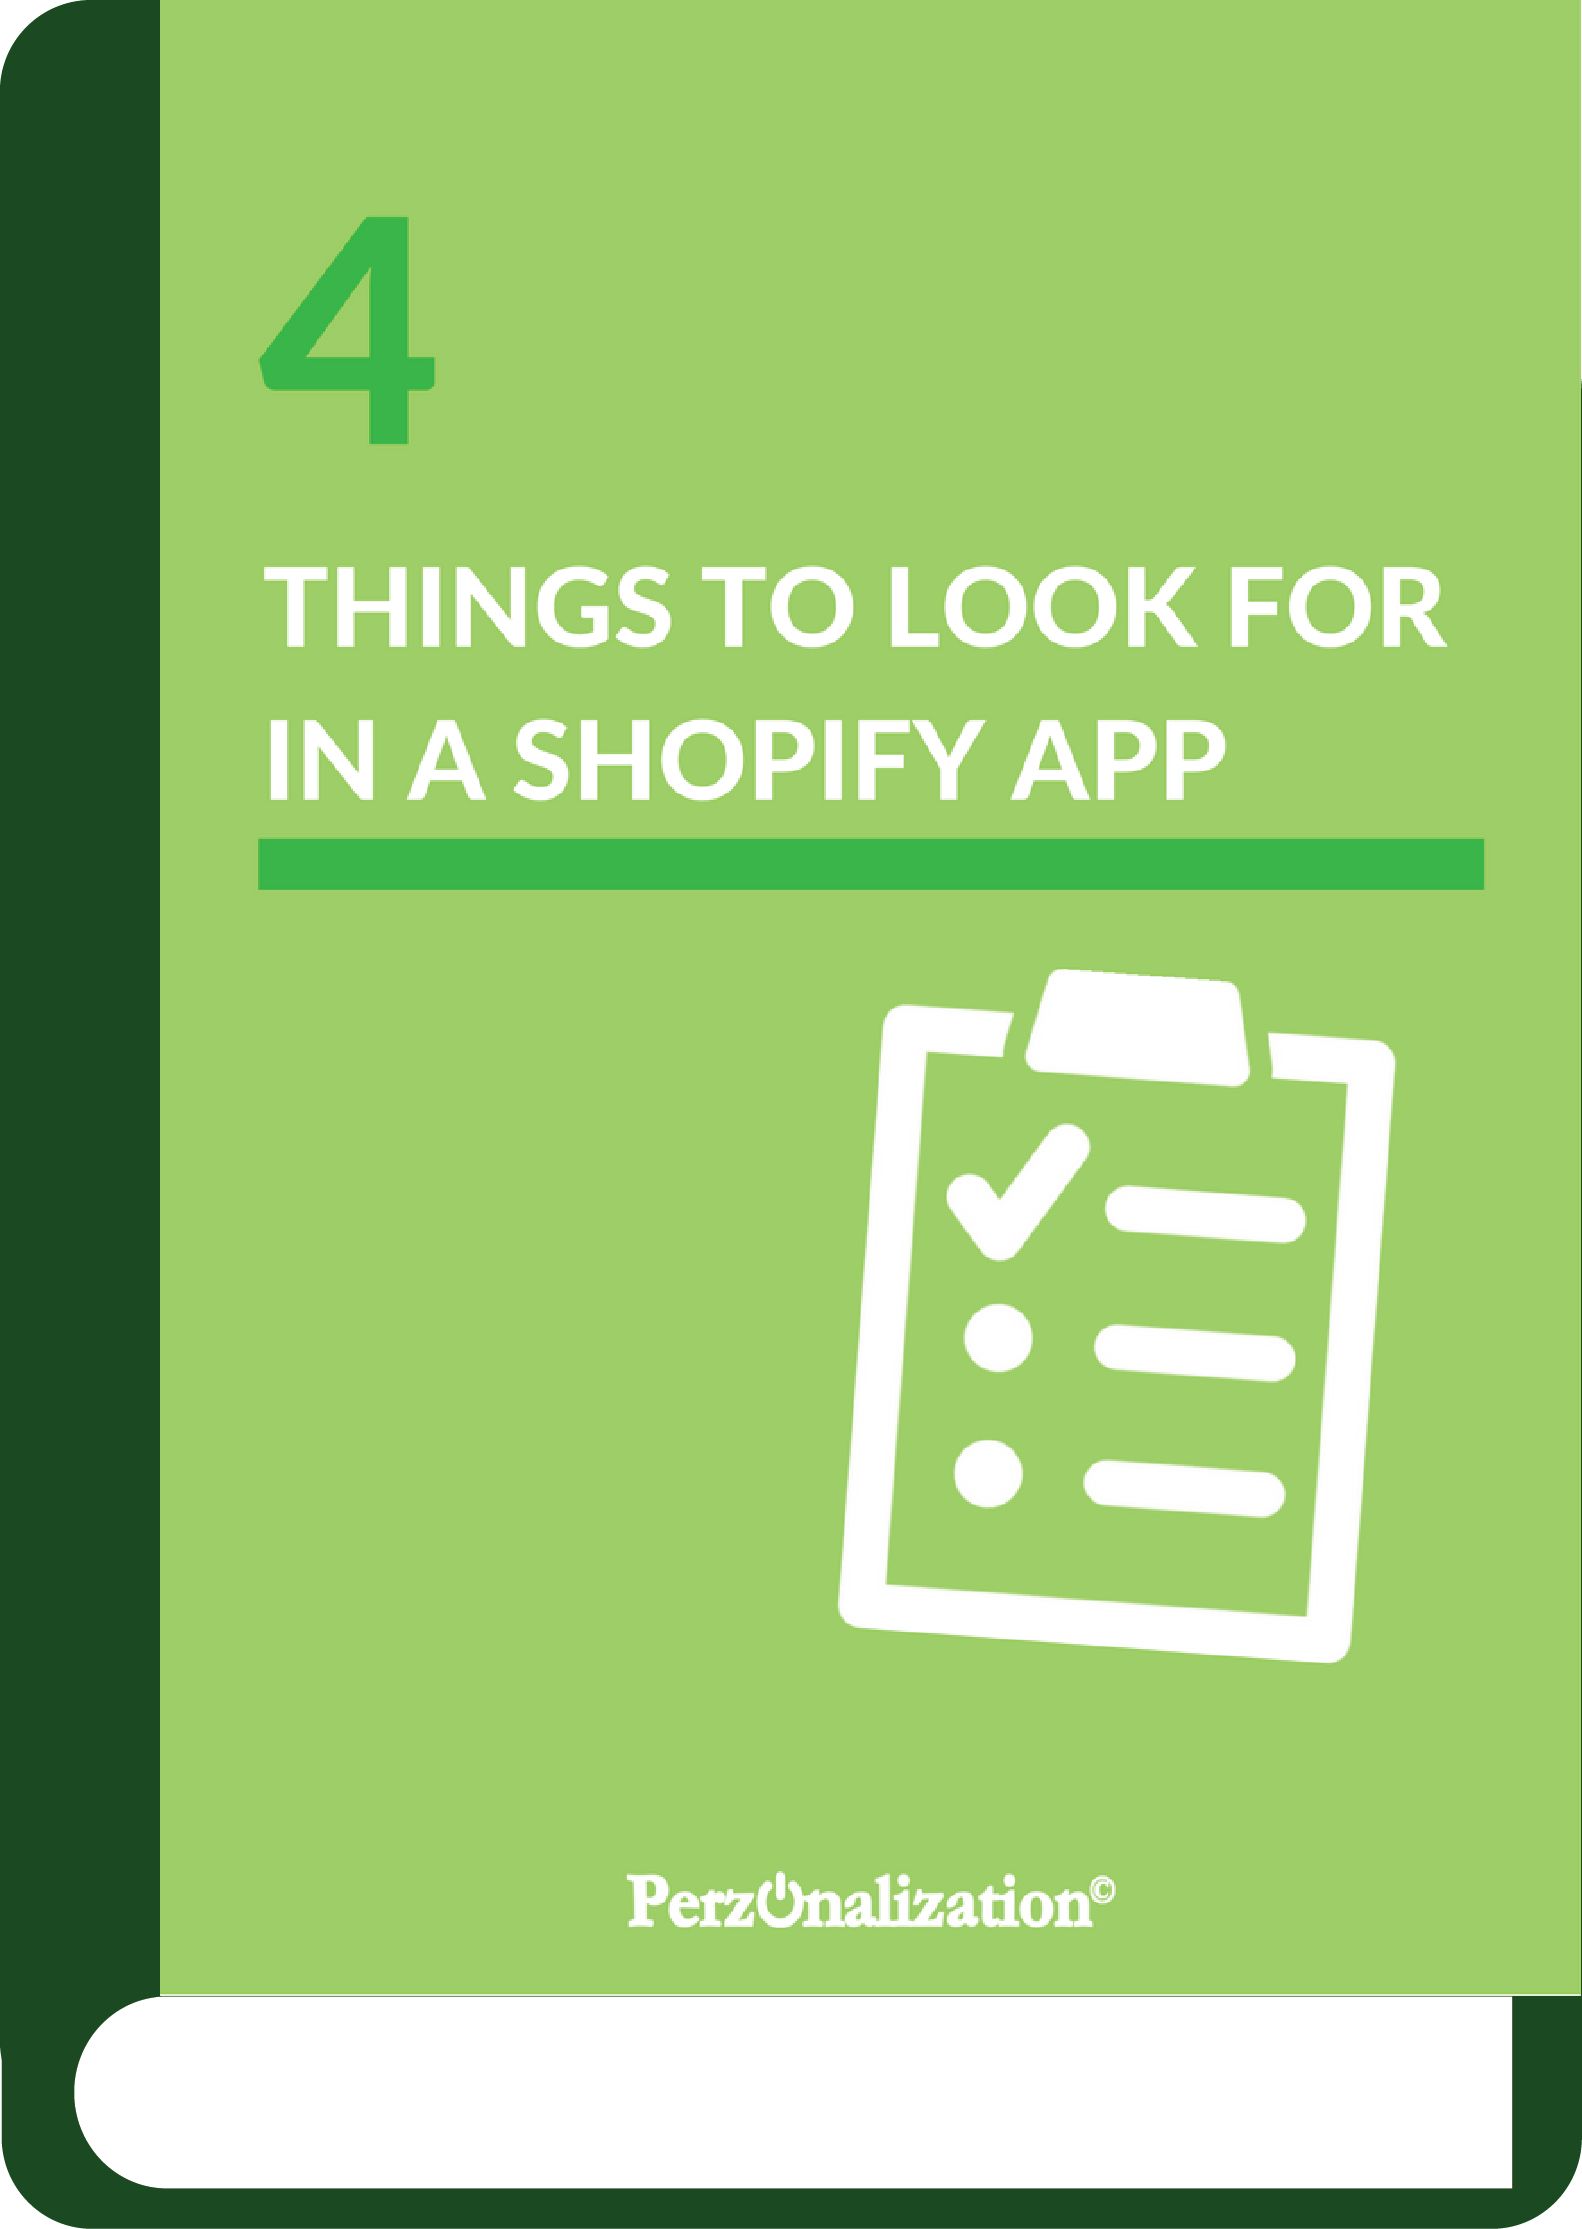 If you’re running an online store on Shopify chances are you’re looking for some apps to help you with your daily business. This eBook will help you choose the best shopify apps for your business.